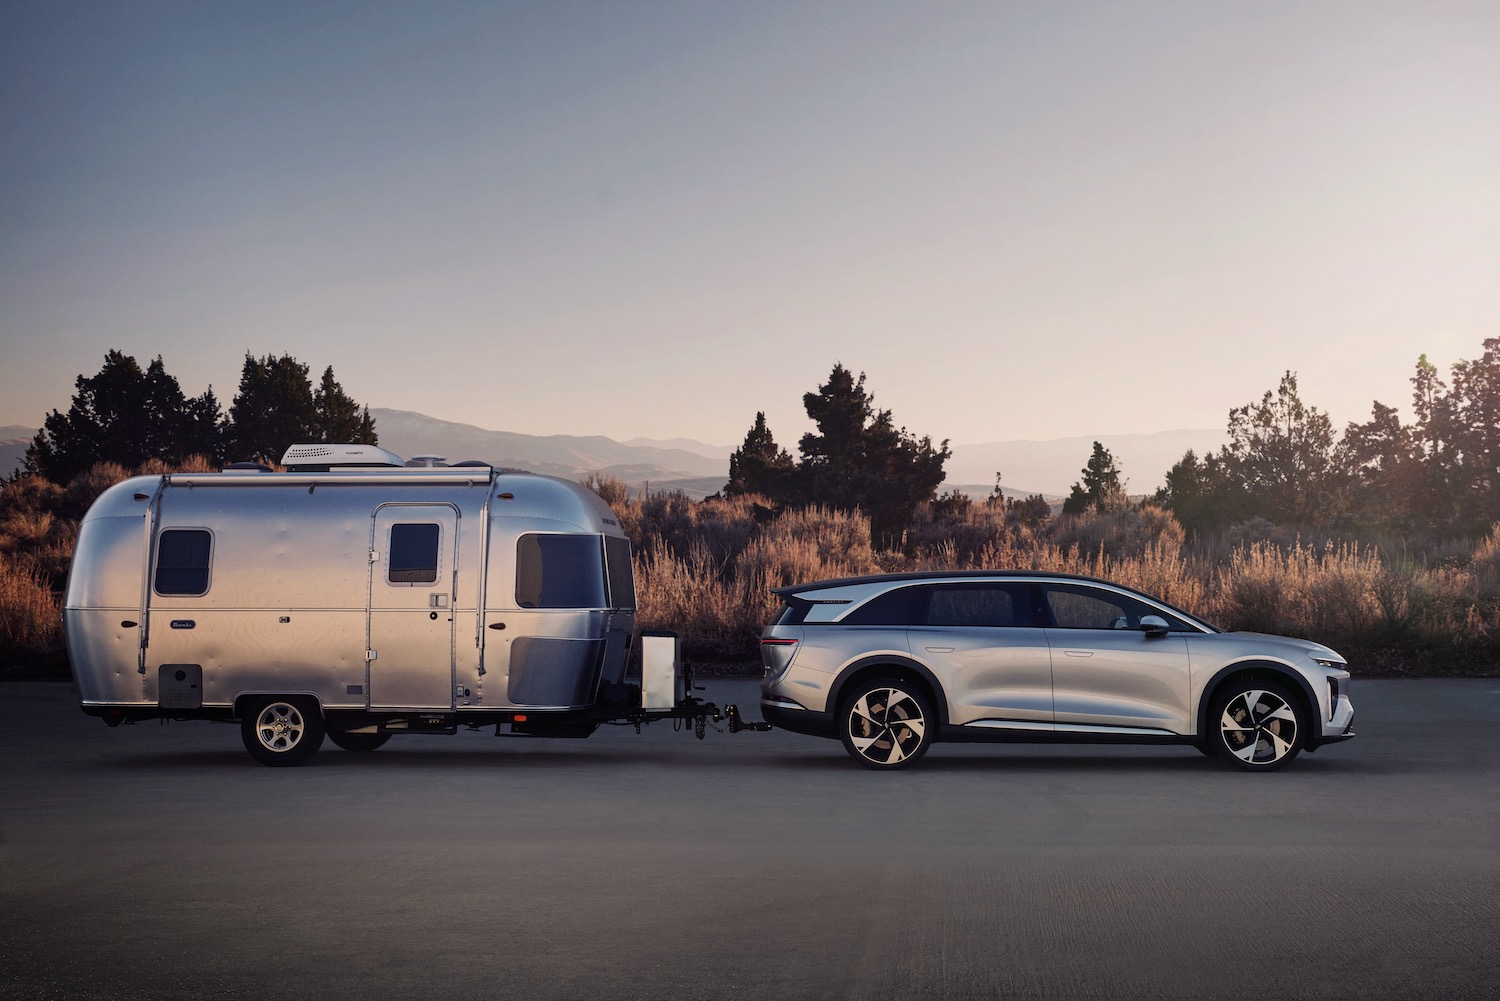 Profile view of a Lucid Gravity electric SUV towing an Airstream trailer.